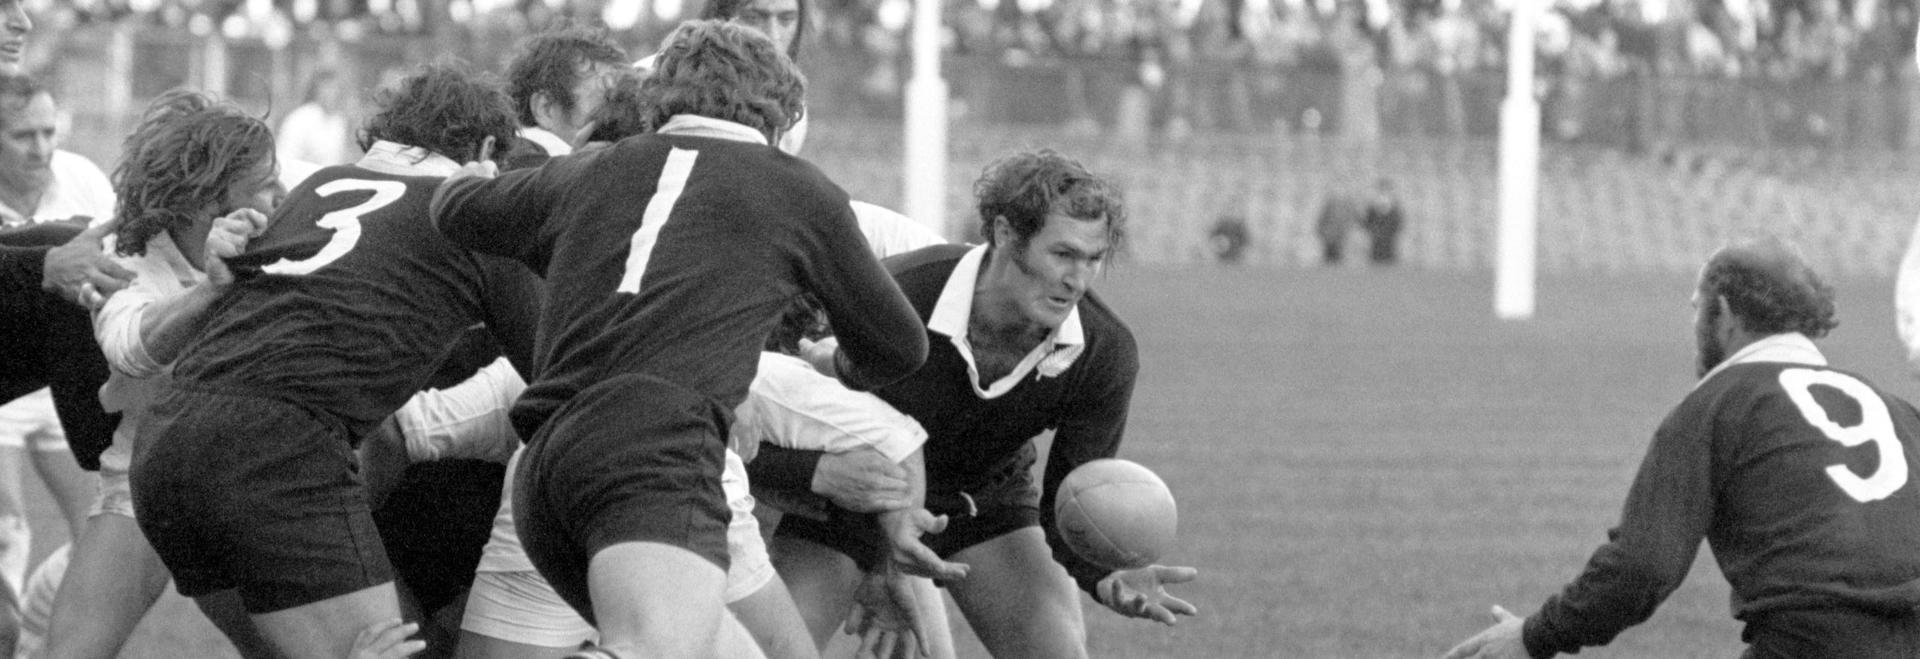 Rugby Union - New Zealand Tour of Britain 1972-73 - London Counties v New Zealand